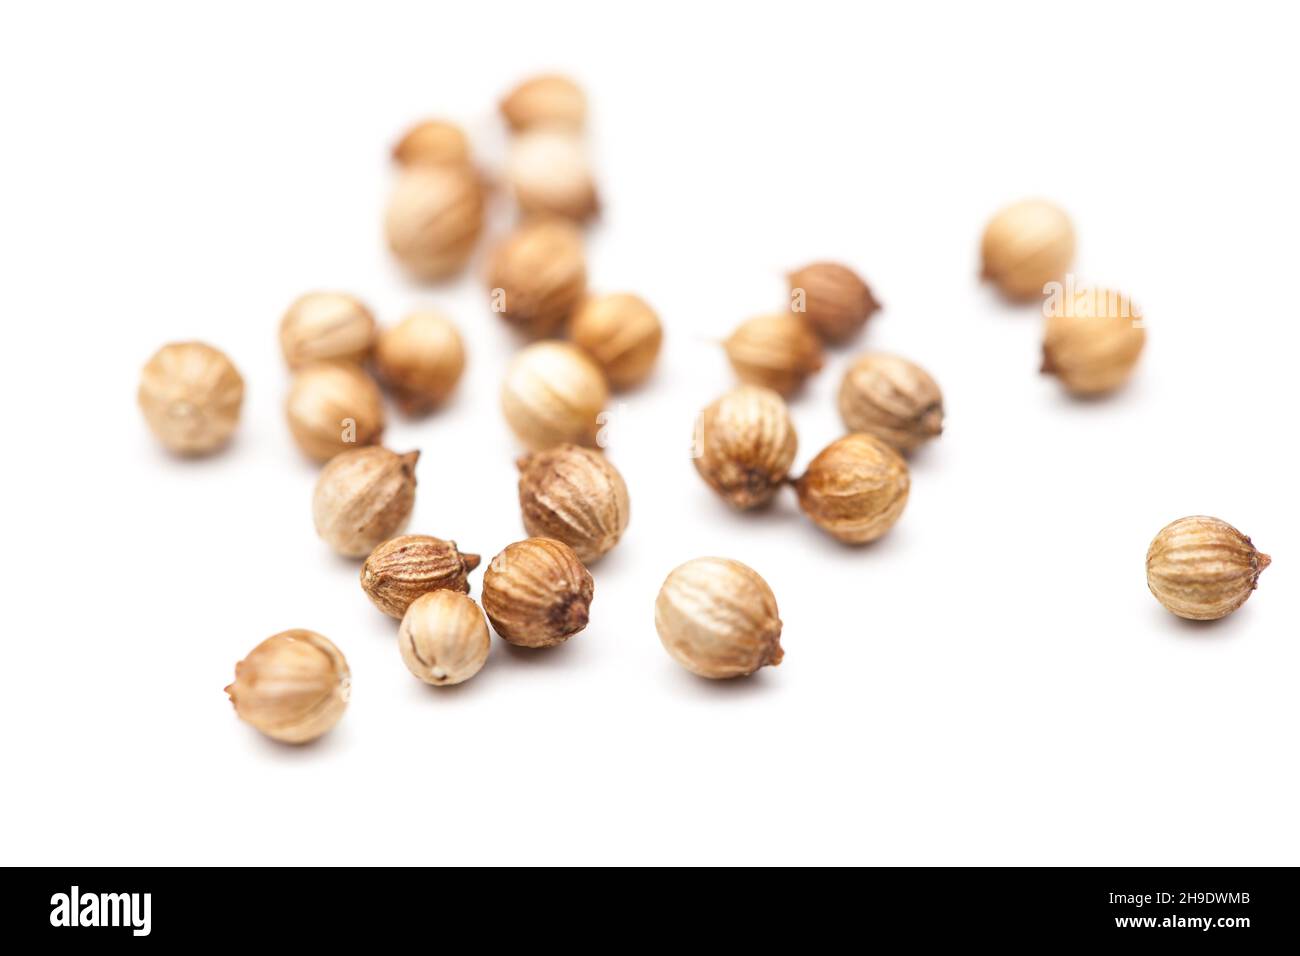 coriander, many grains, single, spice, some, close, white, magnification, sharpness course, dry, background, detail, light brown, flavor, close-up, sp Stock Photo